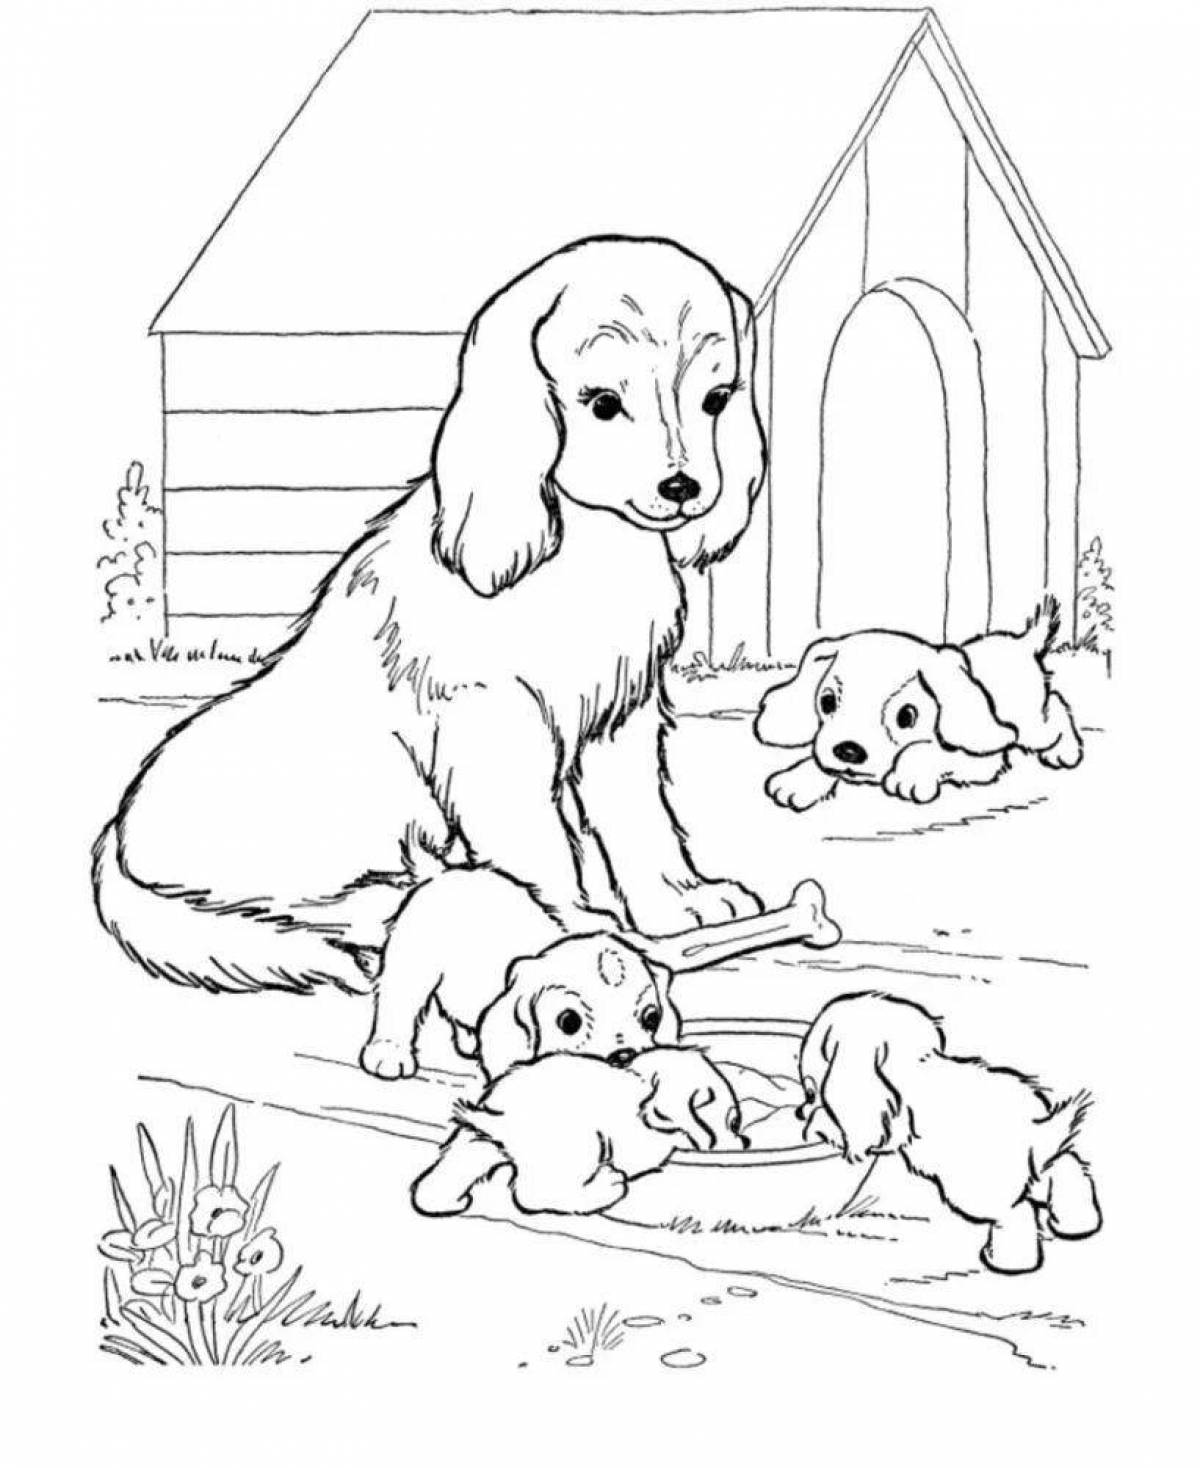 Colourful dog coloring book for children 5-6 years old